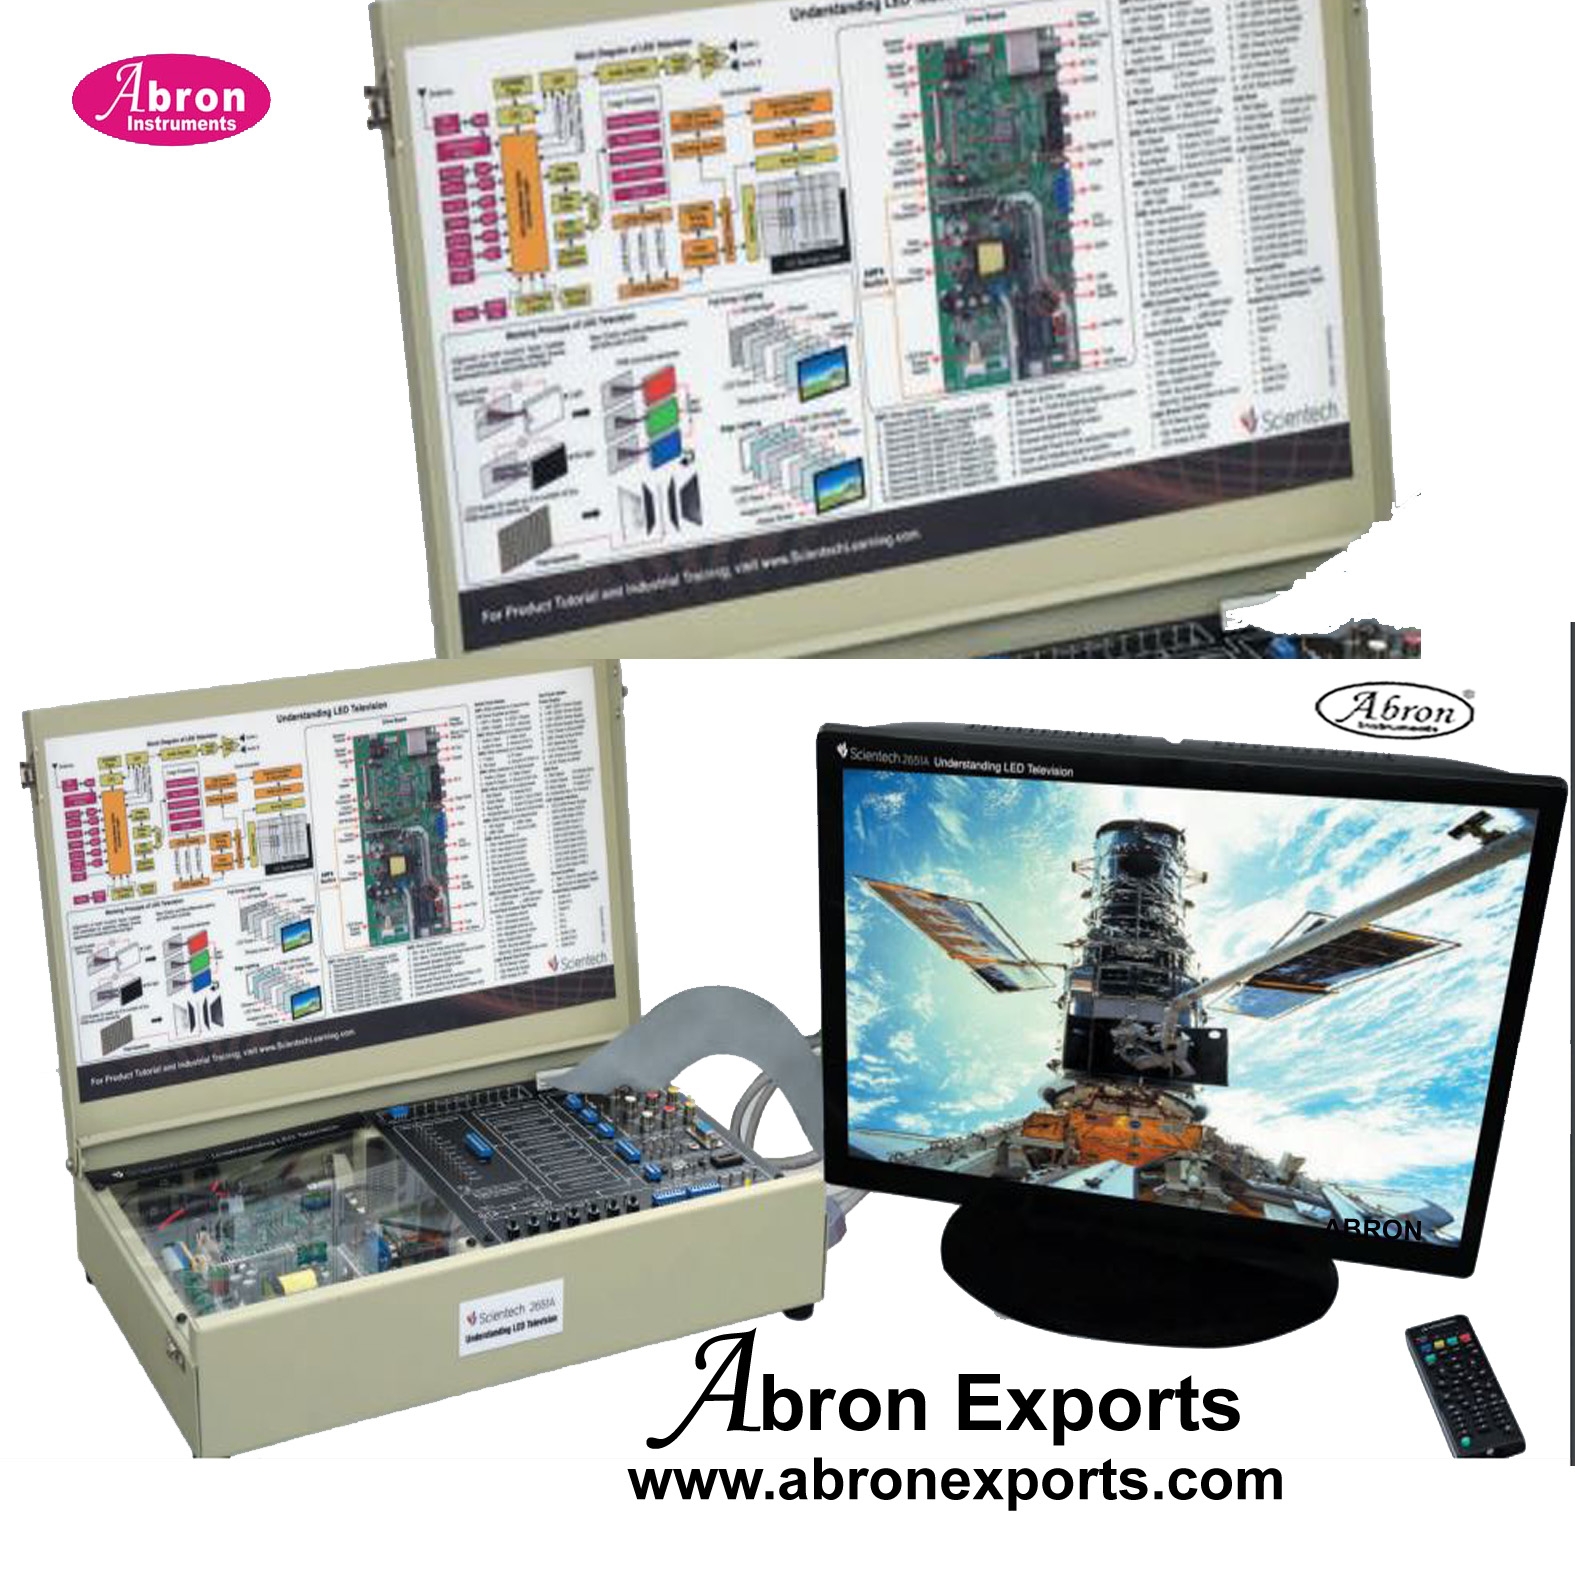 Demo LCD TV Reciever Television Electronic Trainer Circuit Board Power Supply Abron AE-1240L 